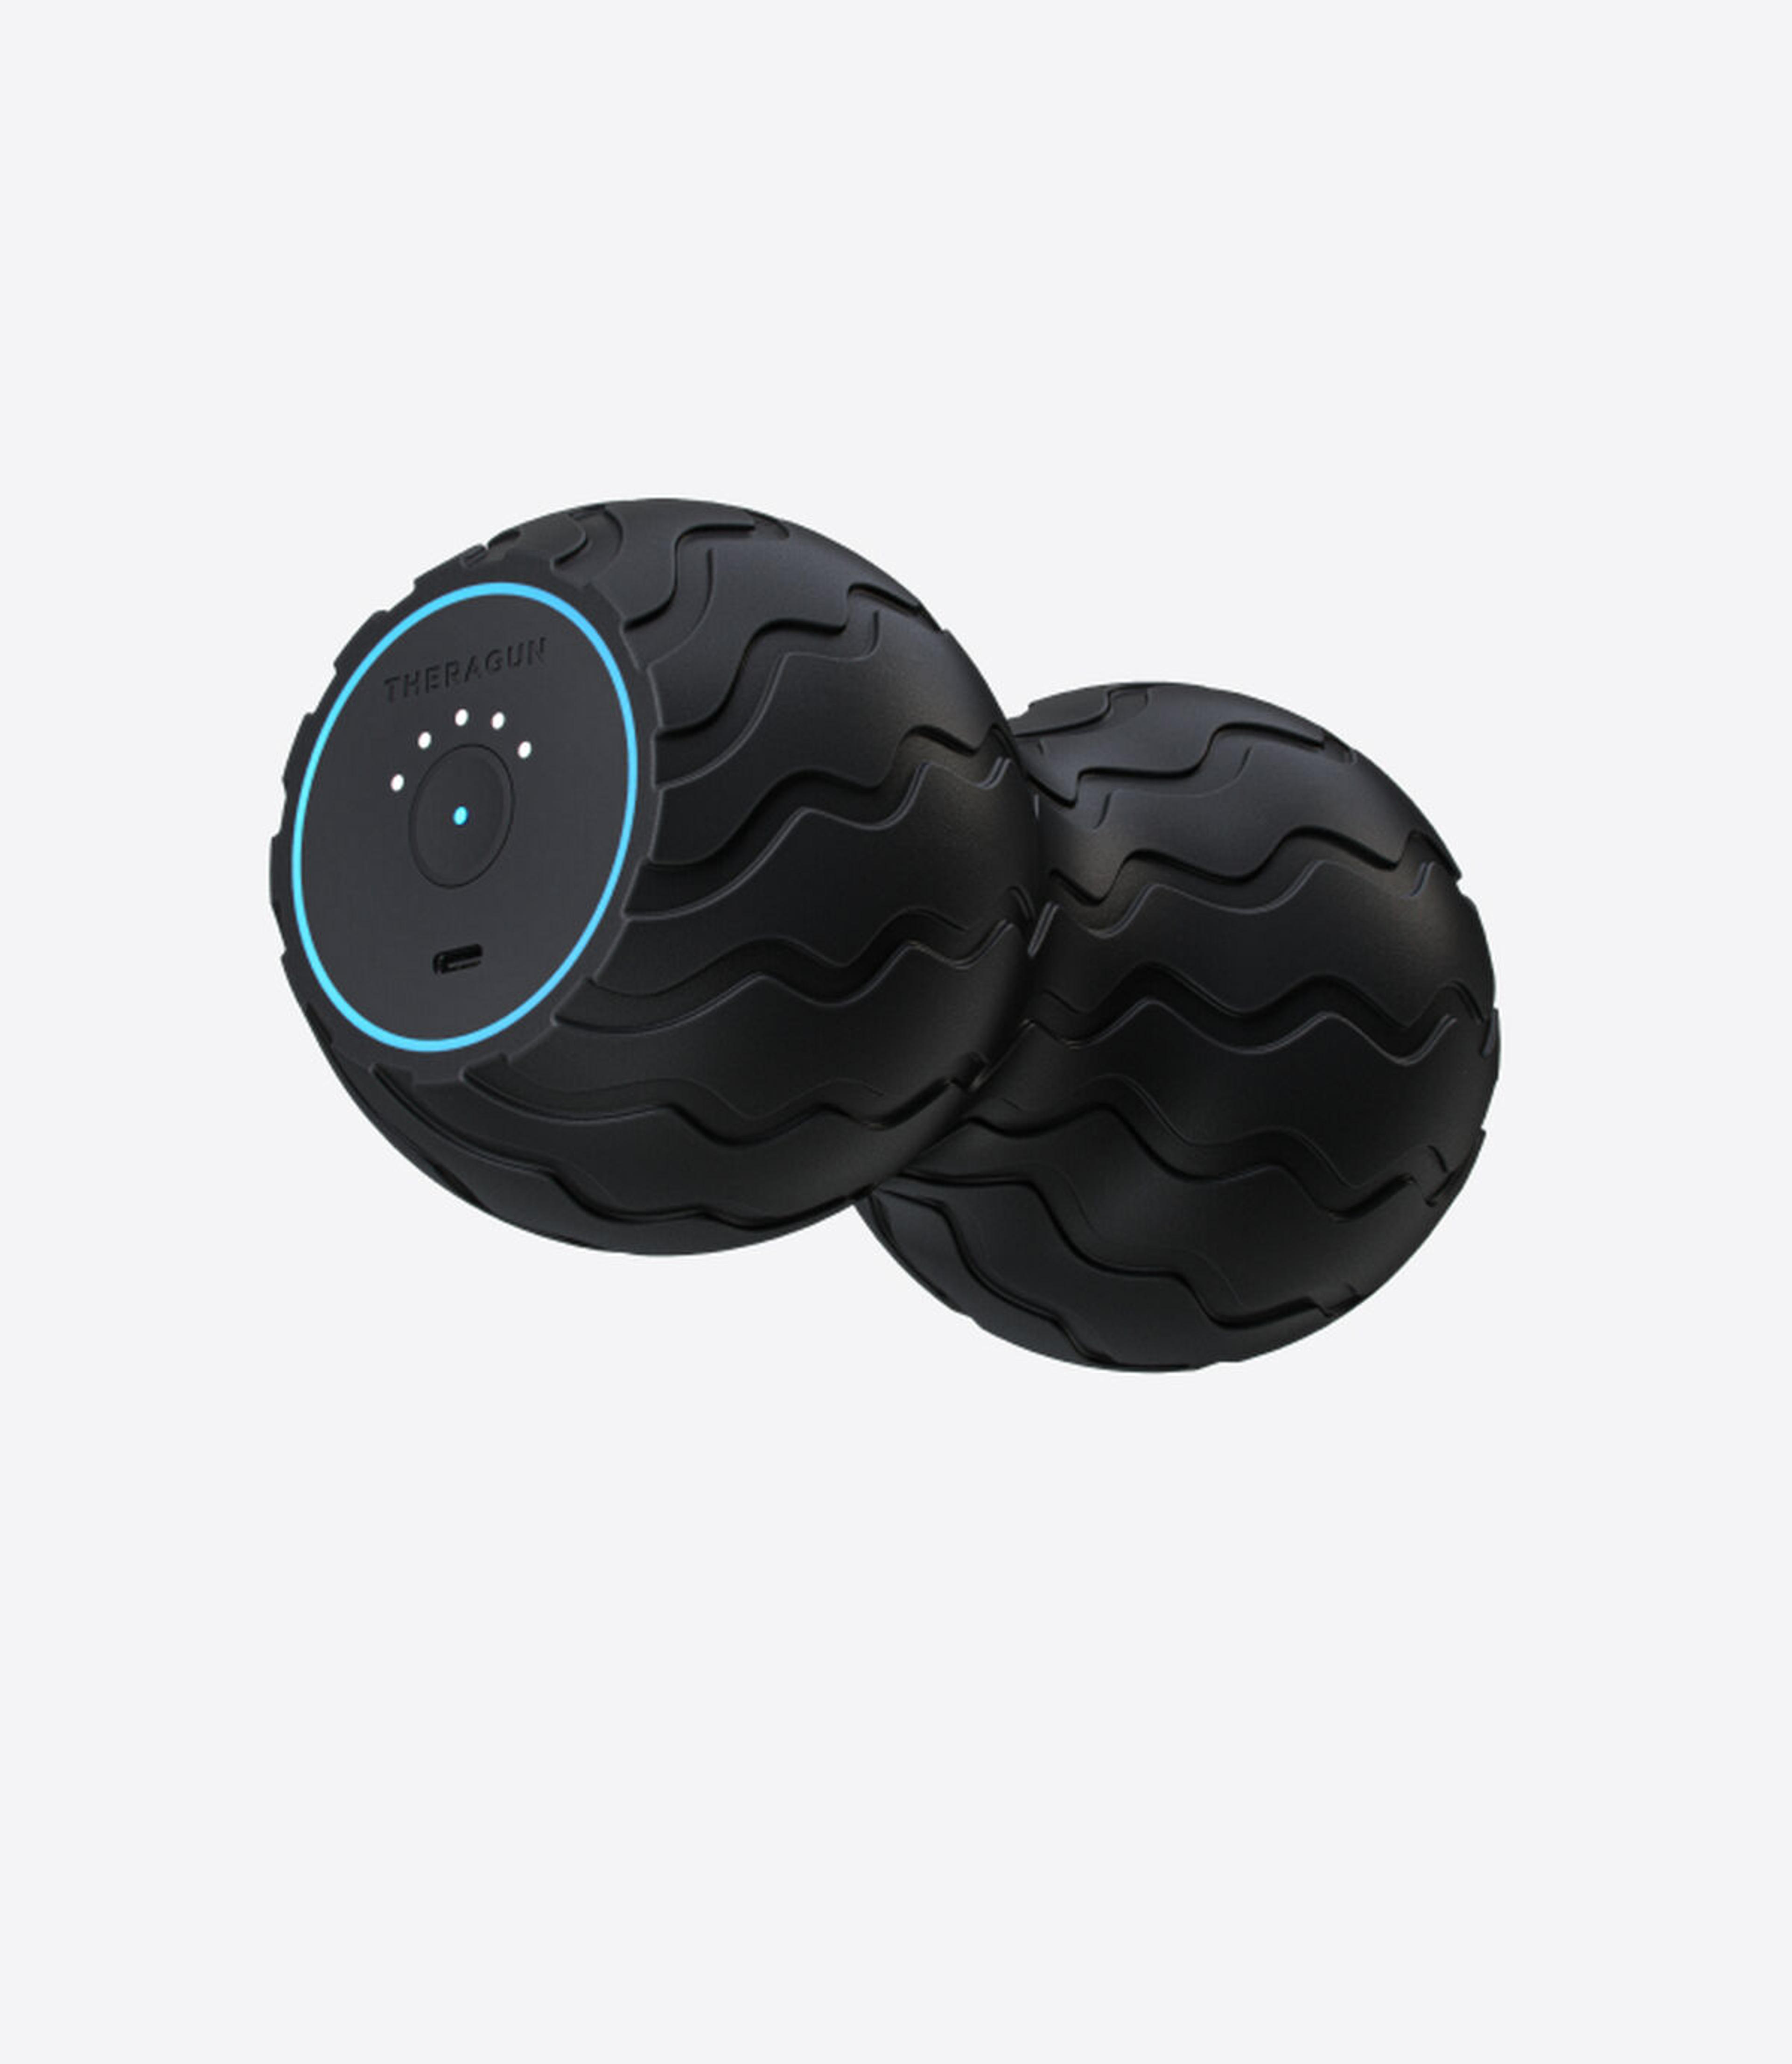 Wave Duo | Vibrating Roller Massage Ball | Therabody.com